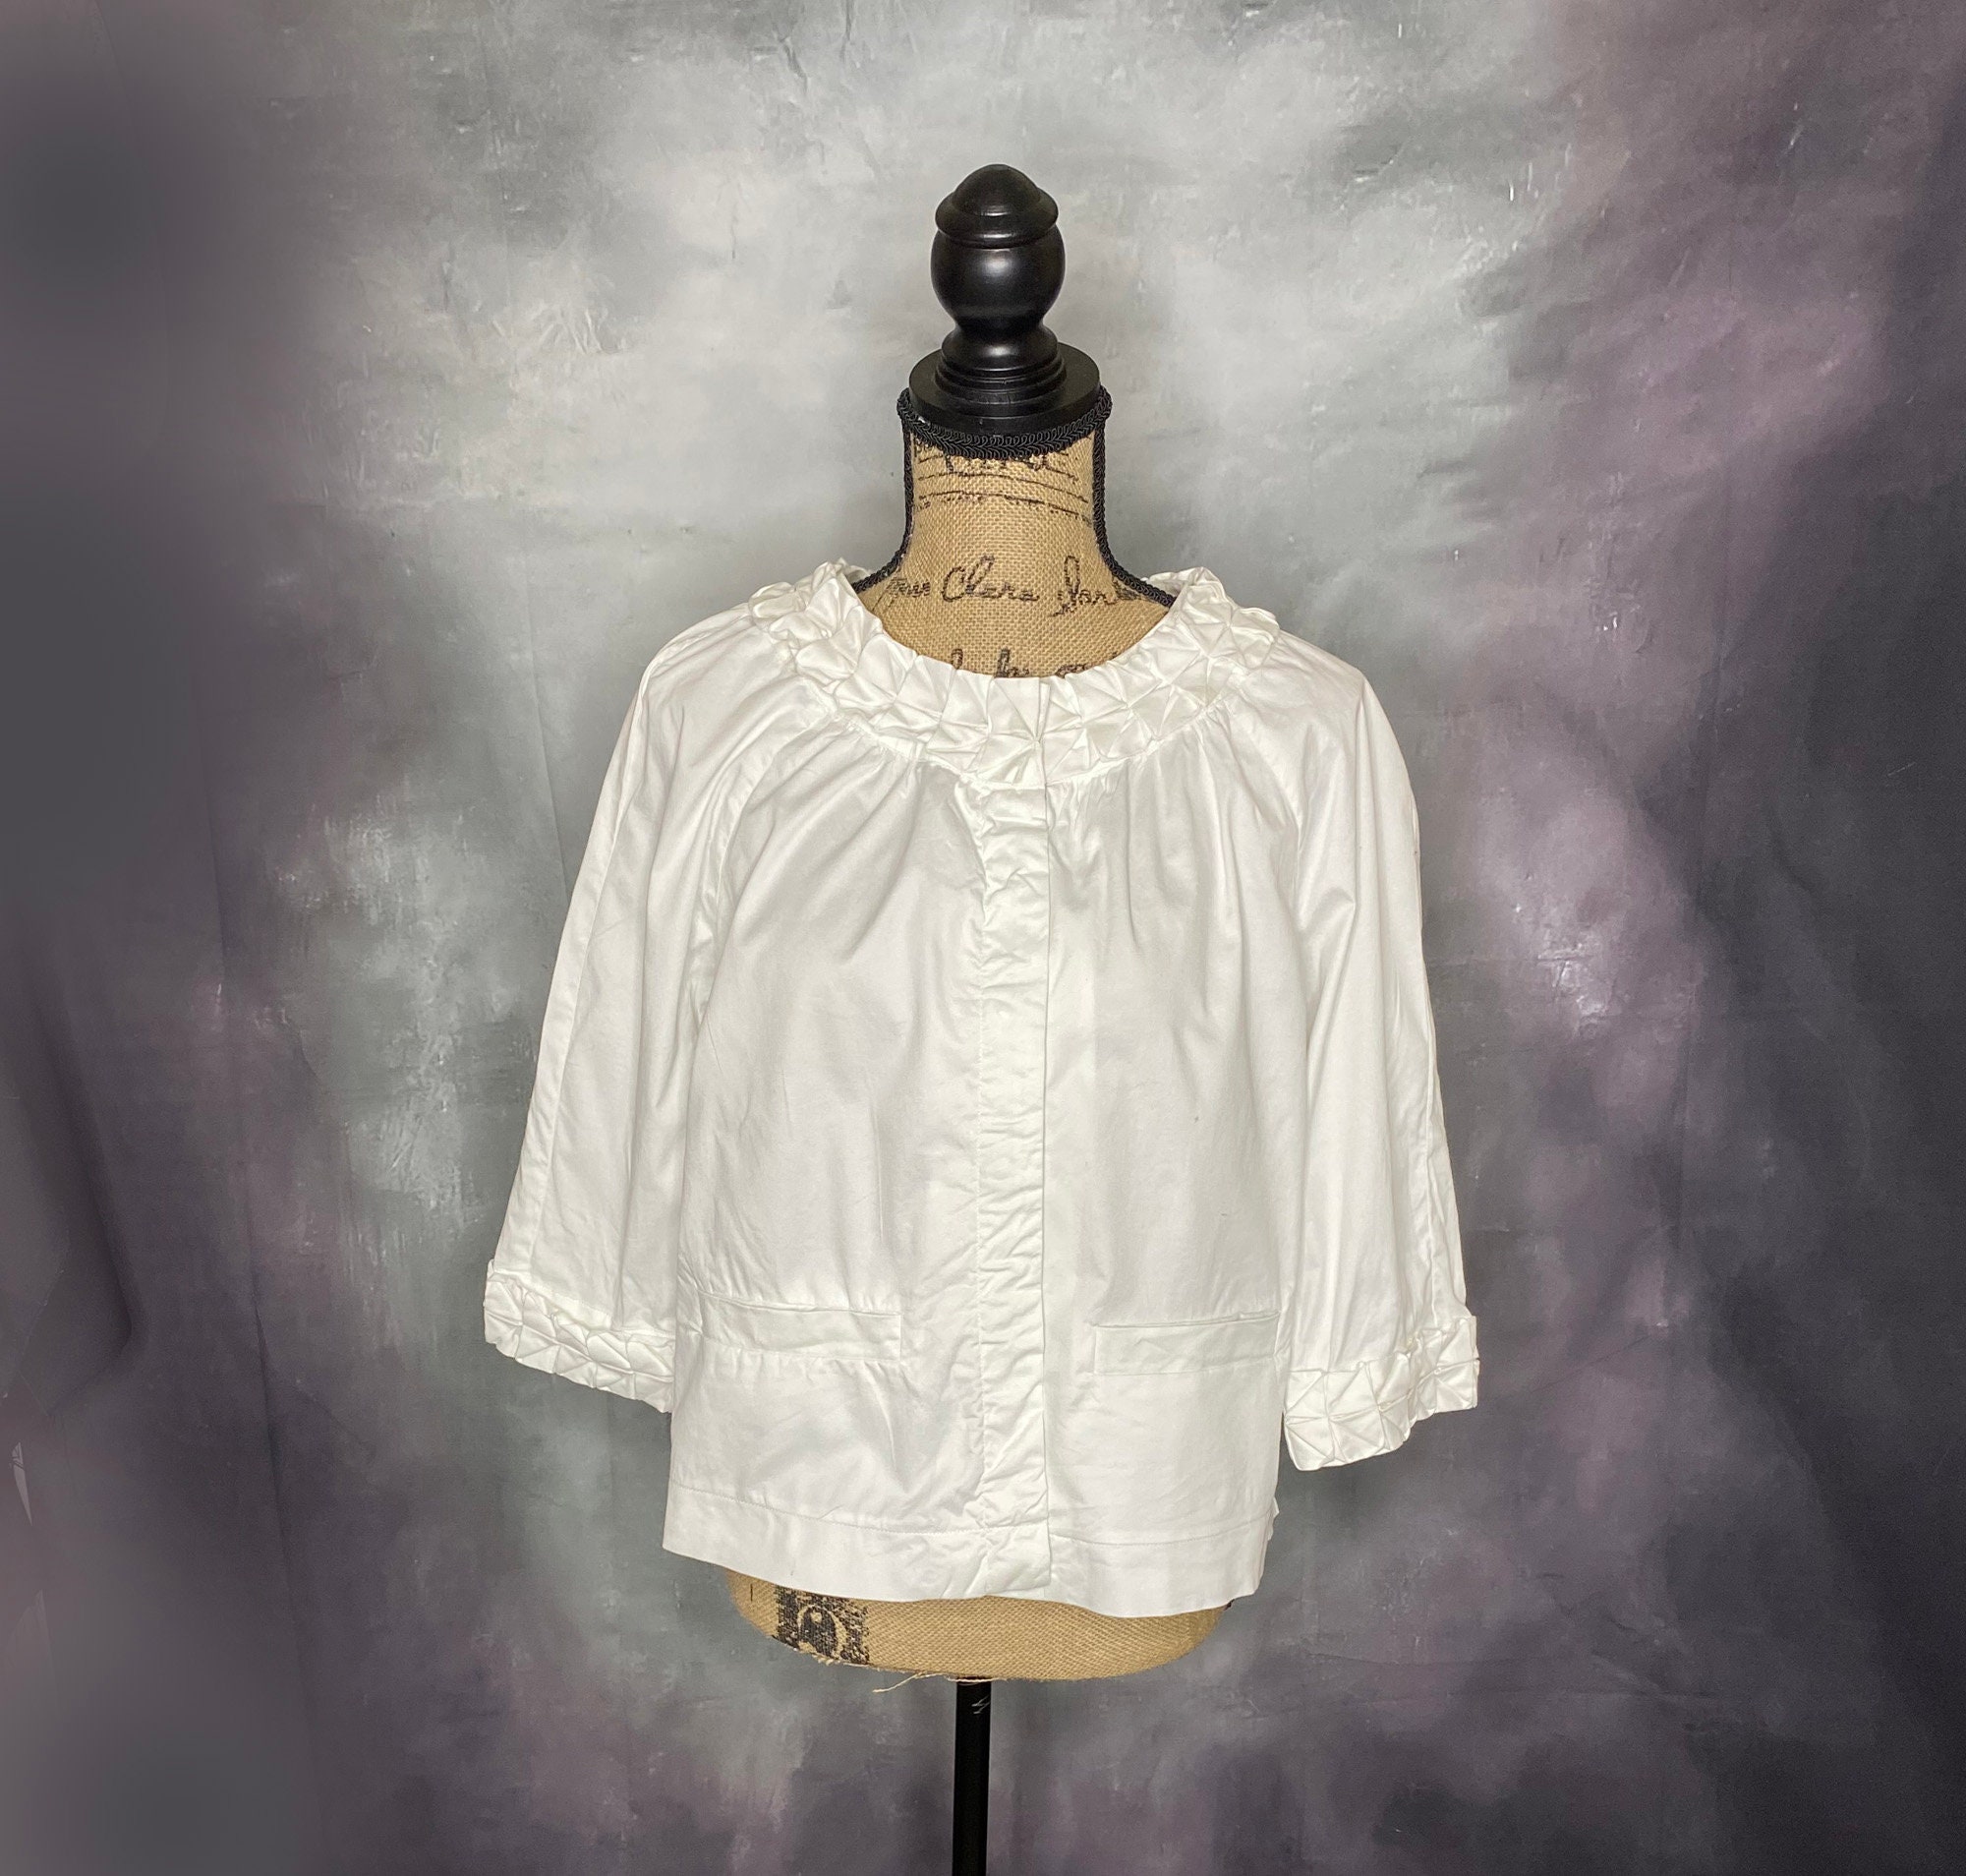 White Blouse, Cotton Blend, 3/4 Length Sleeves, Cropped, Ruffle Neckline & Cuffs, Chloe Dao, 90's, Small